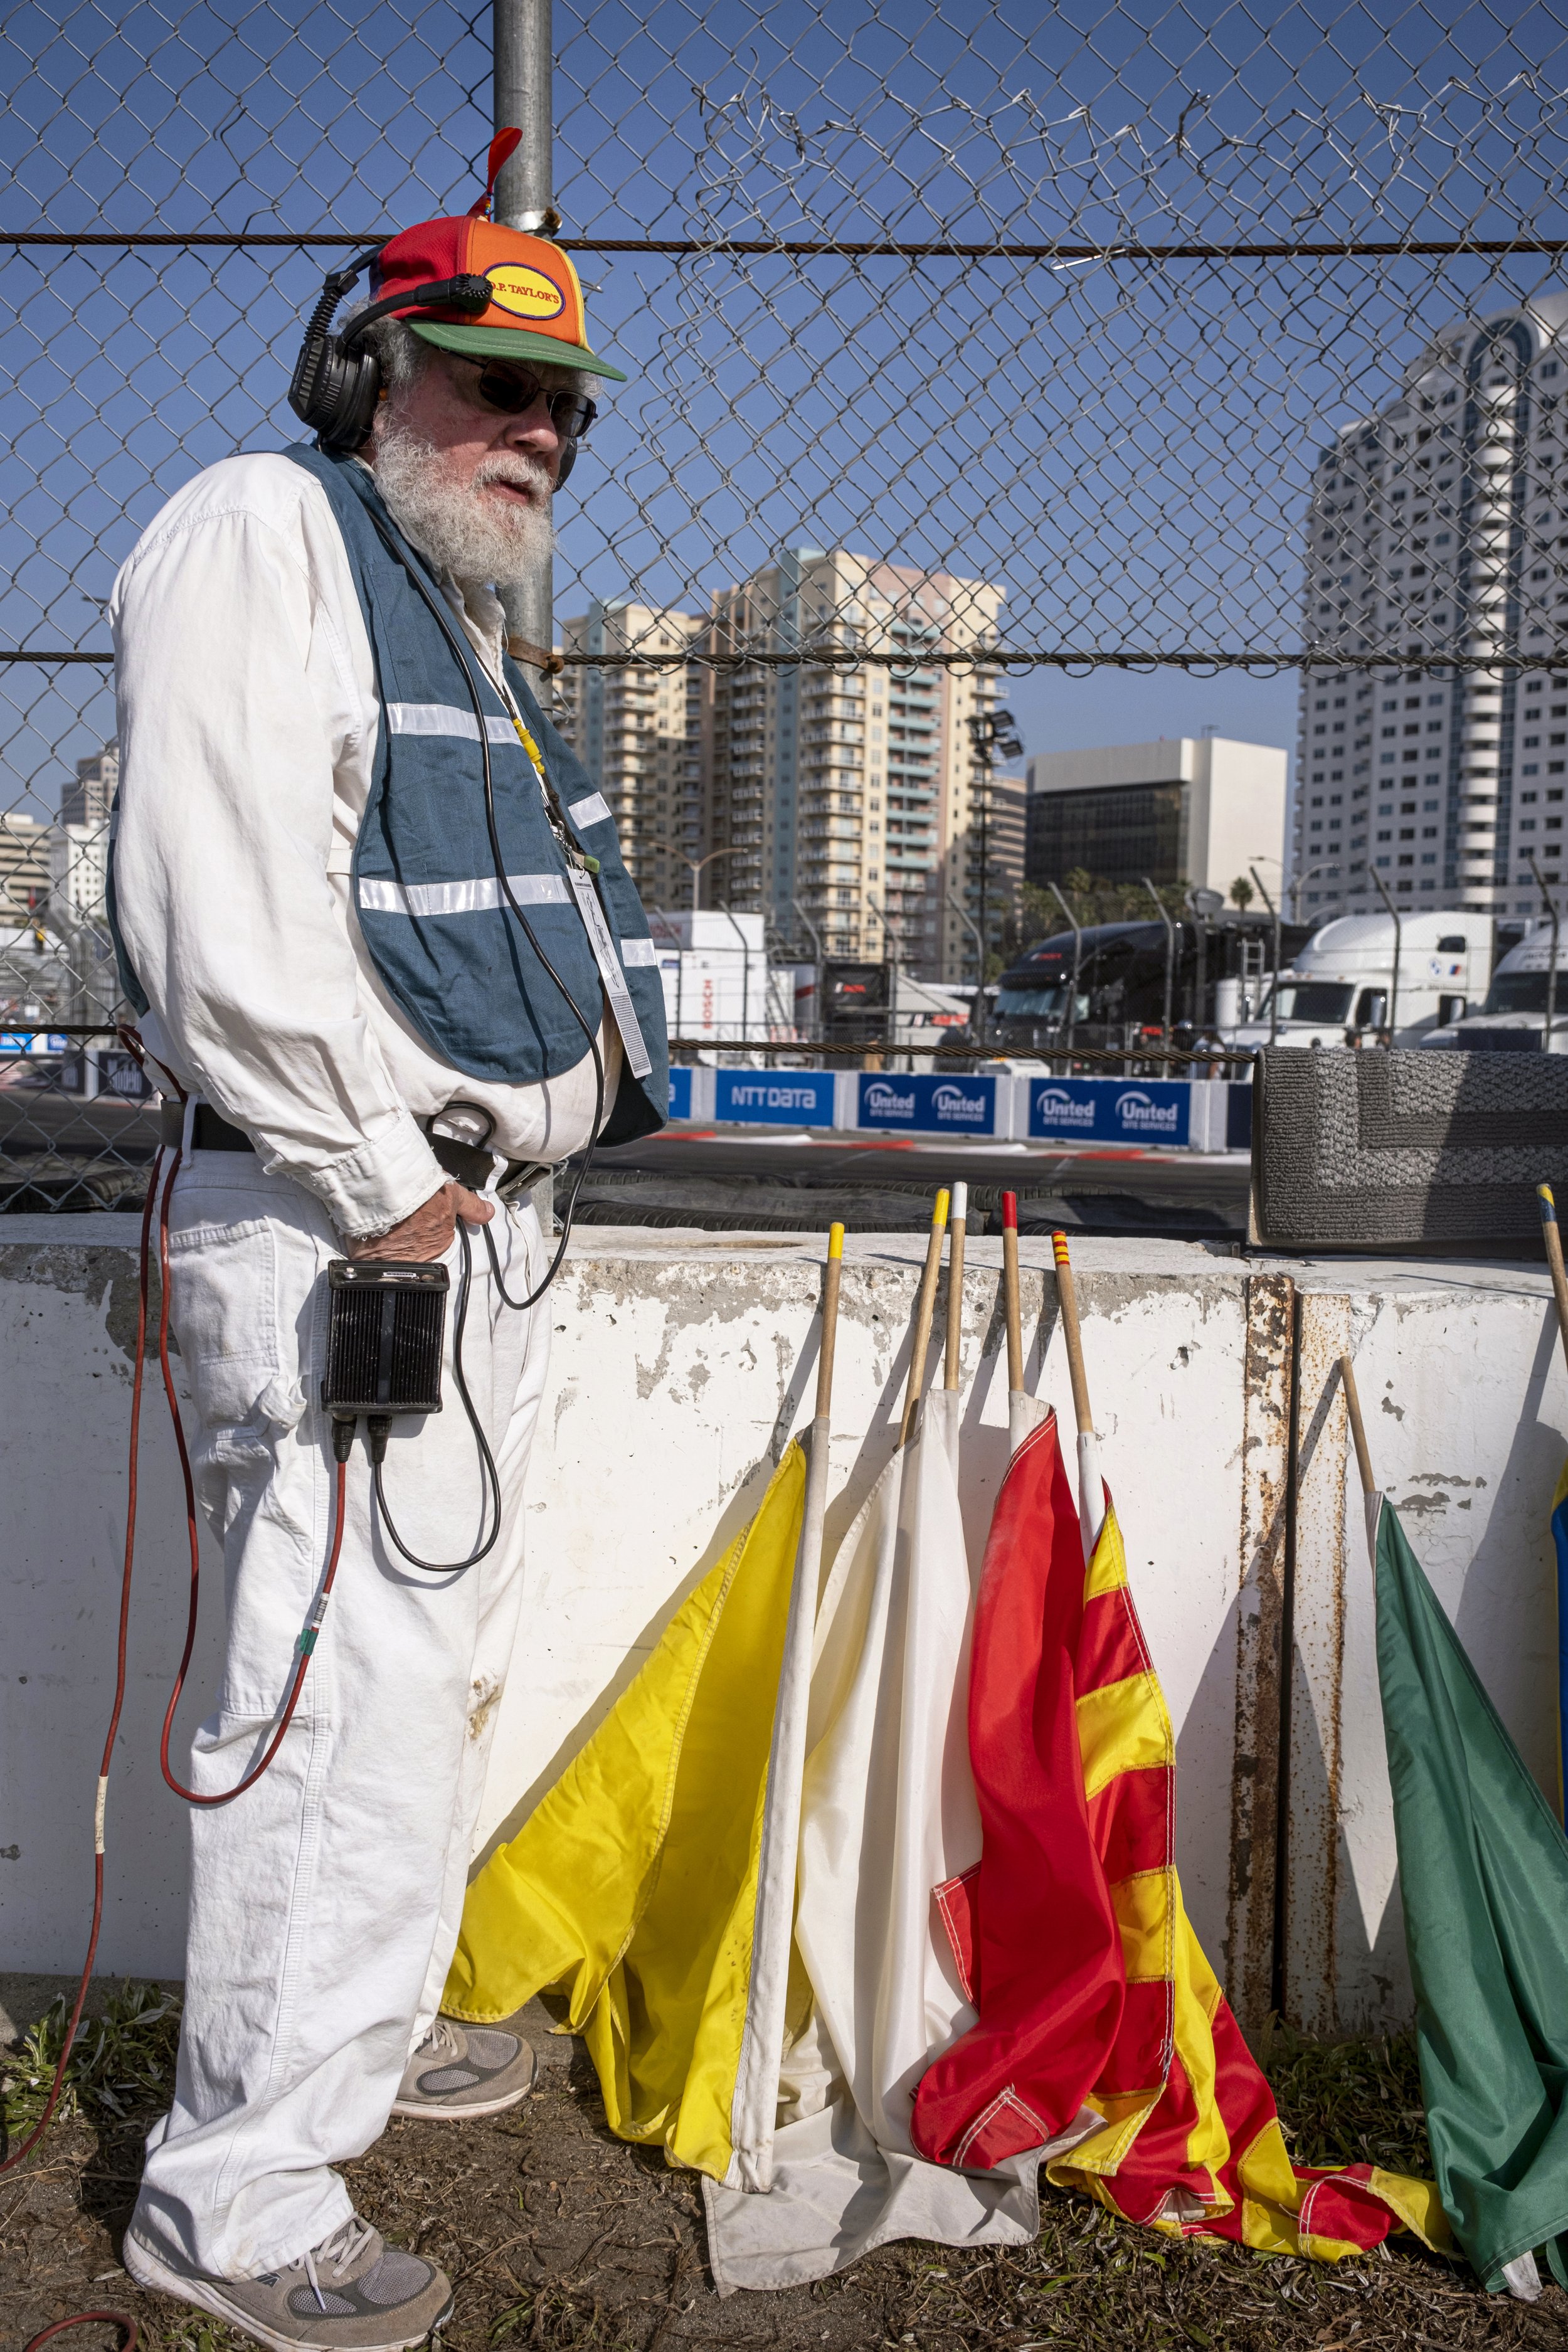  Racing marshal stands by flags, which colors corrospond and signal different conditions. 48th Annual Acura Grand Prix in Long Beach, Calif. on Sat., April 15, 2023. (Anna Sophia Moltke | The Corsair) 